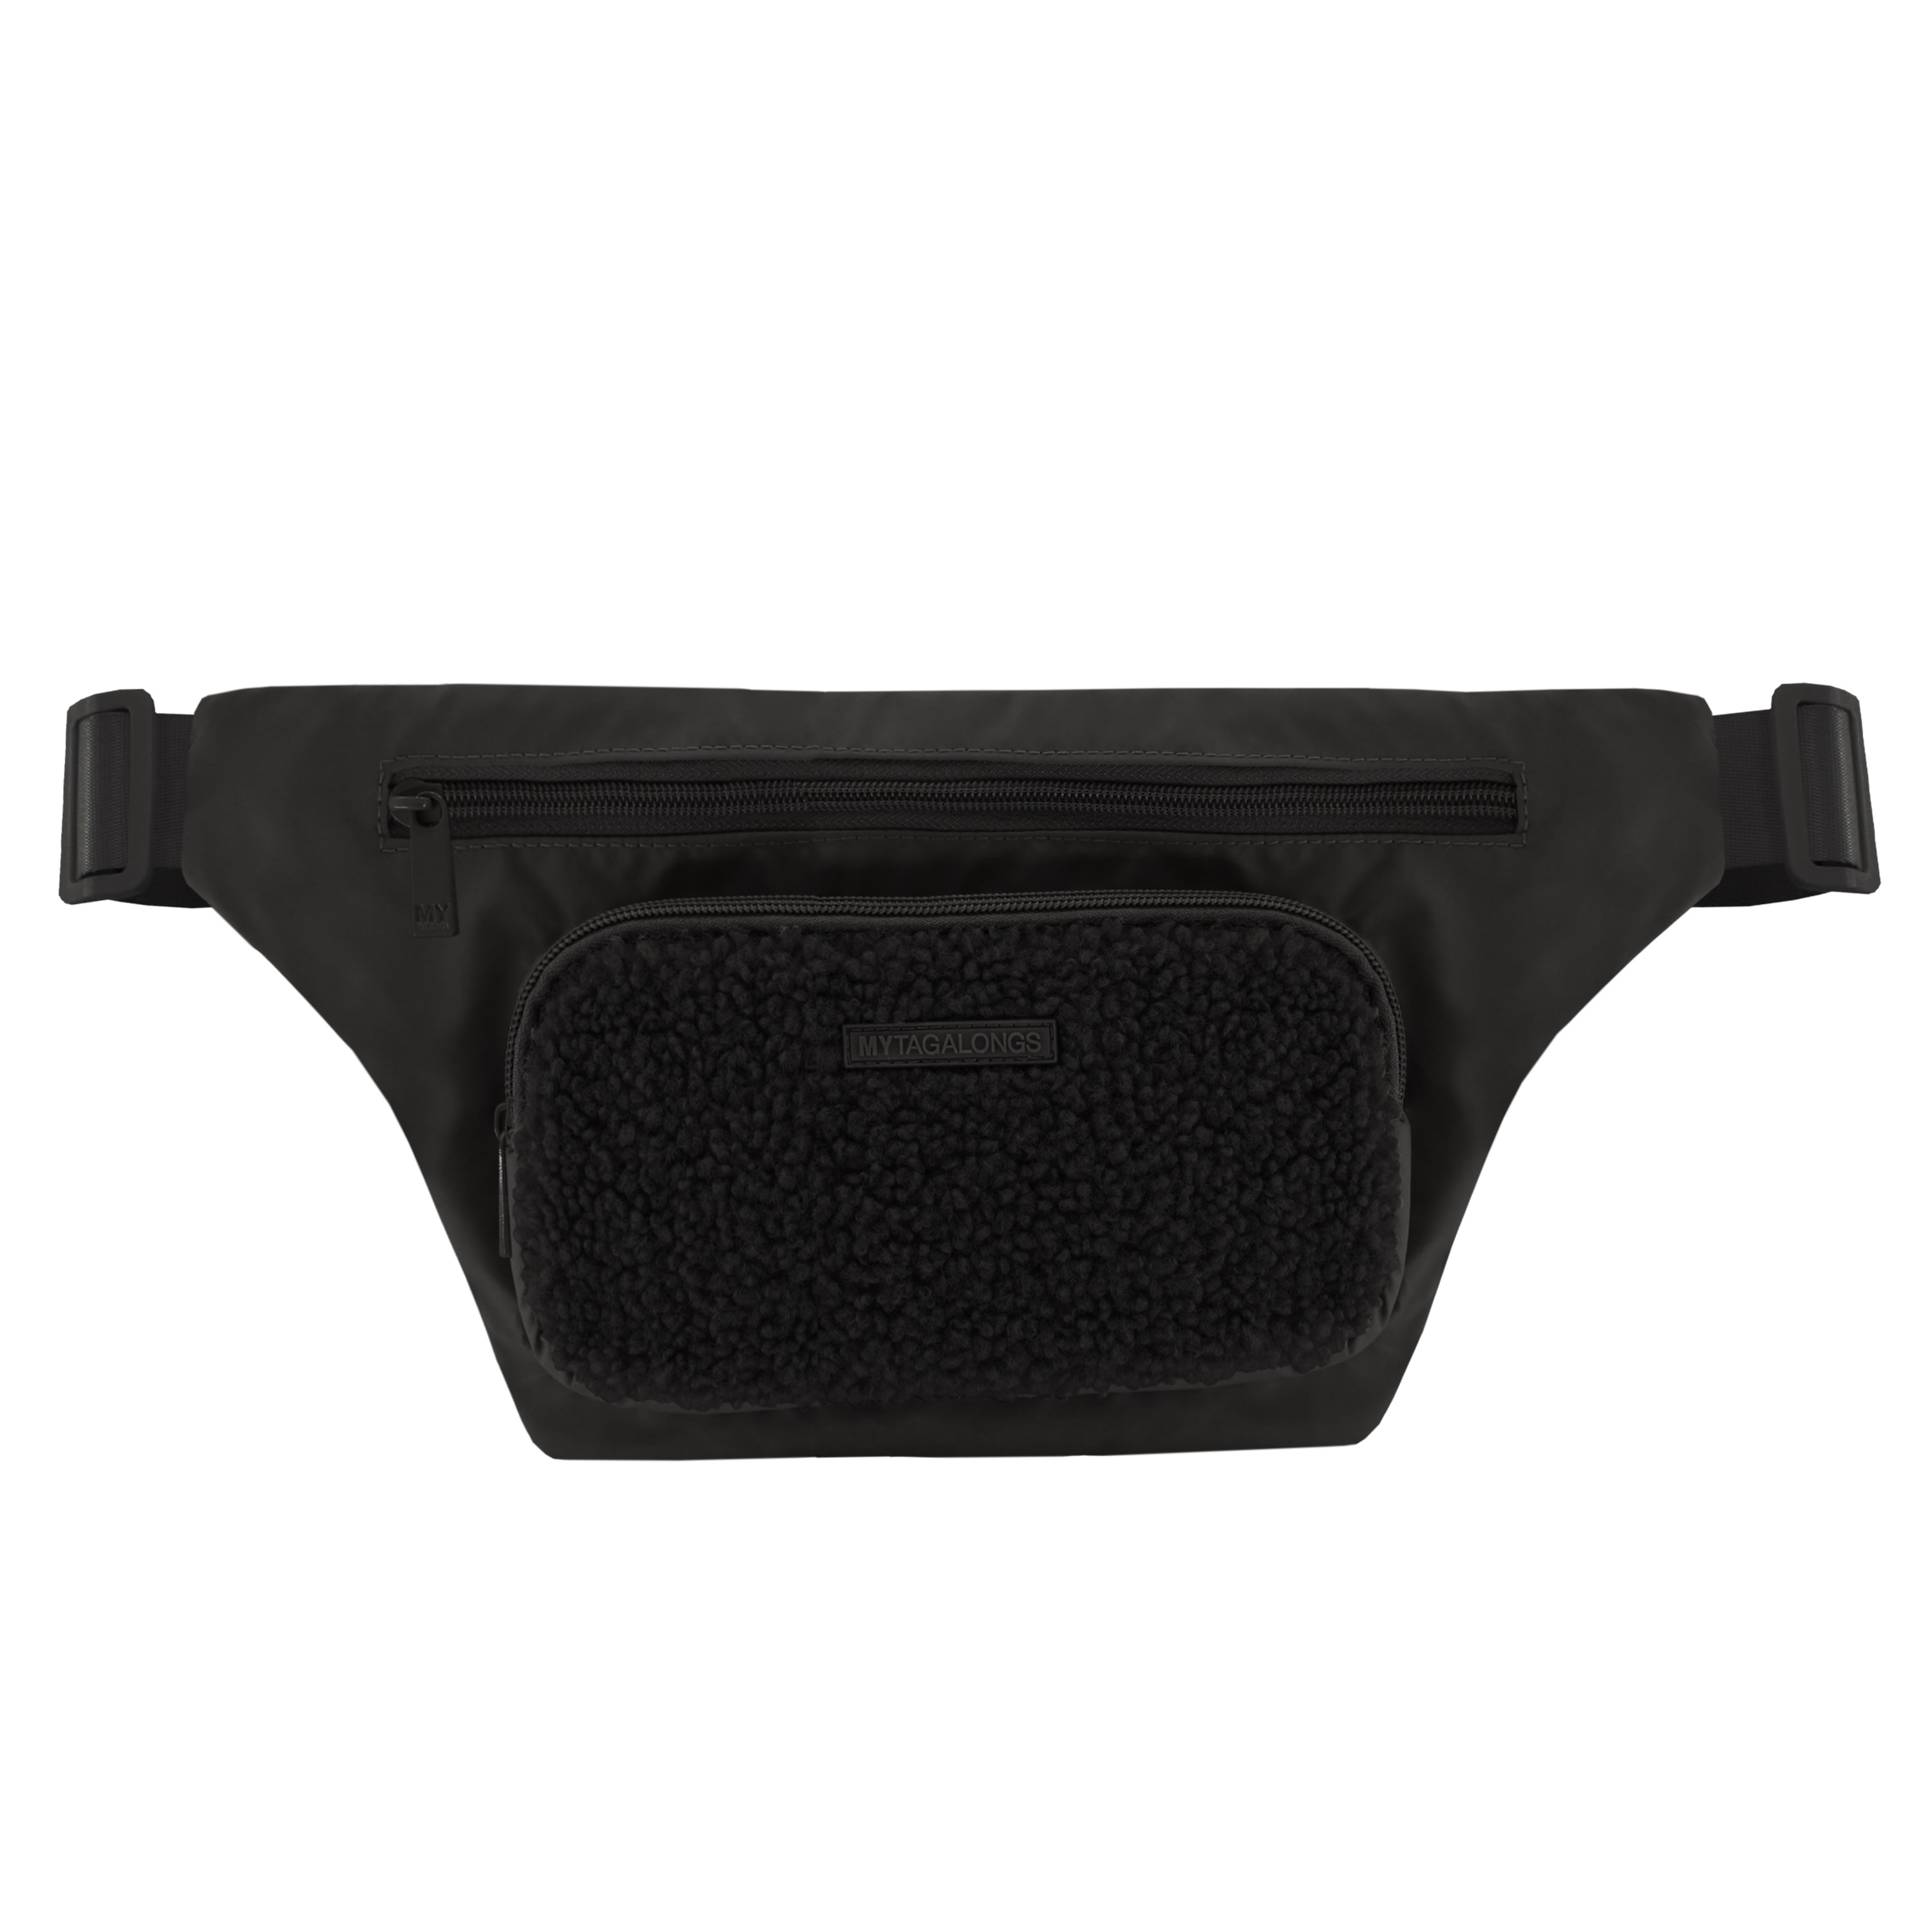 Black fanny pack with pockets made of recycled material